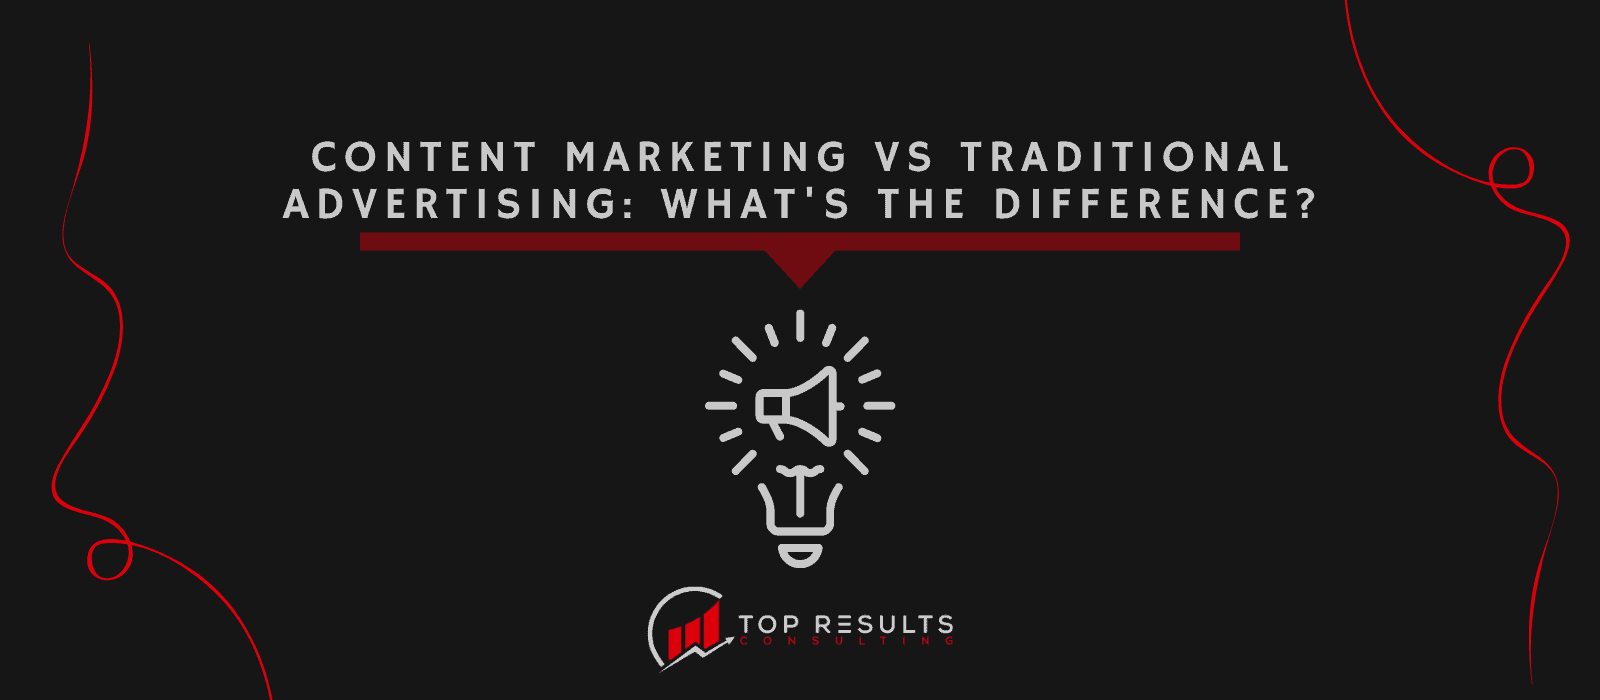 Content Marketing vs Traditional Advertising